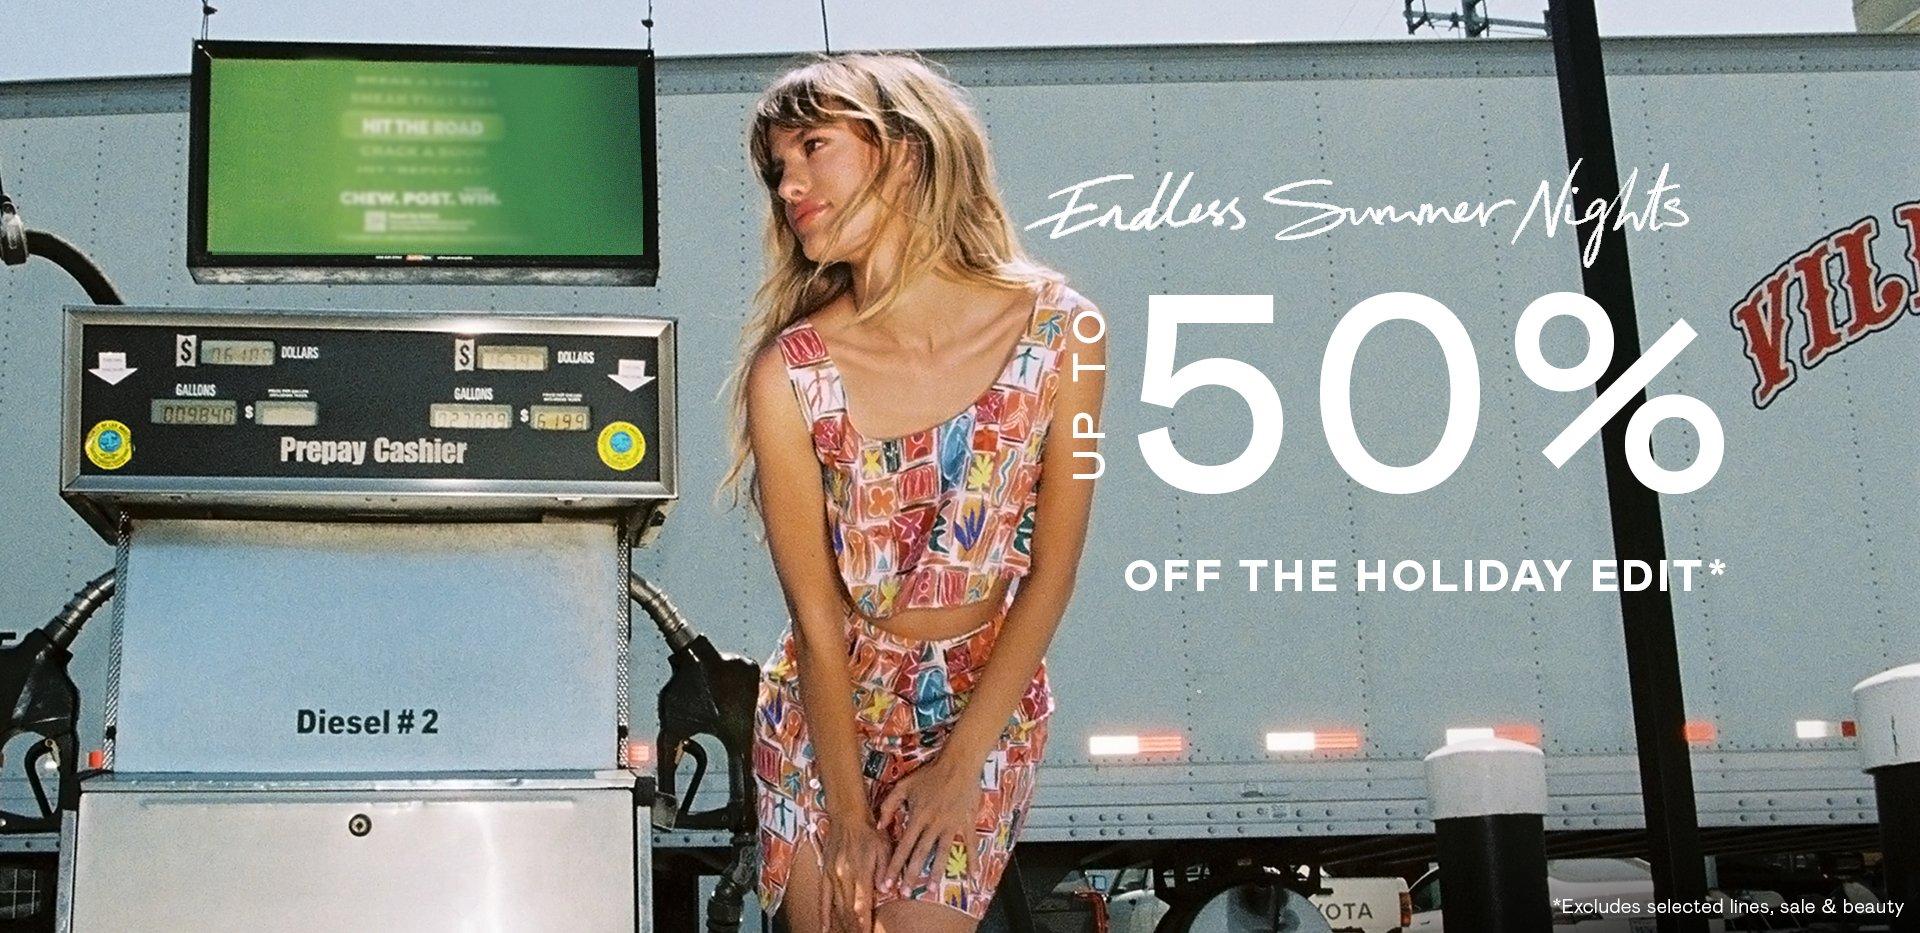 Up to 50% OFF Holiday Edit